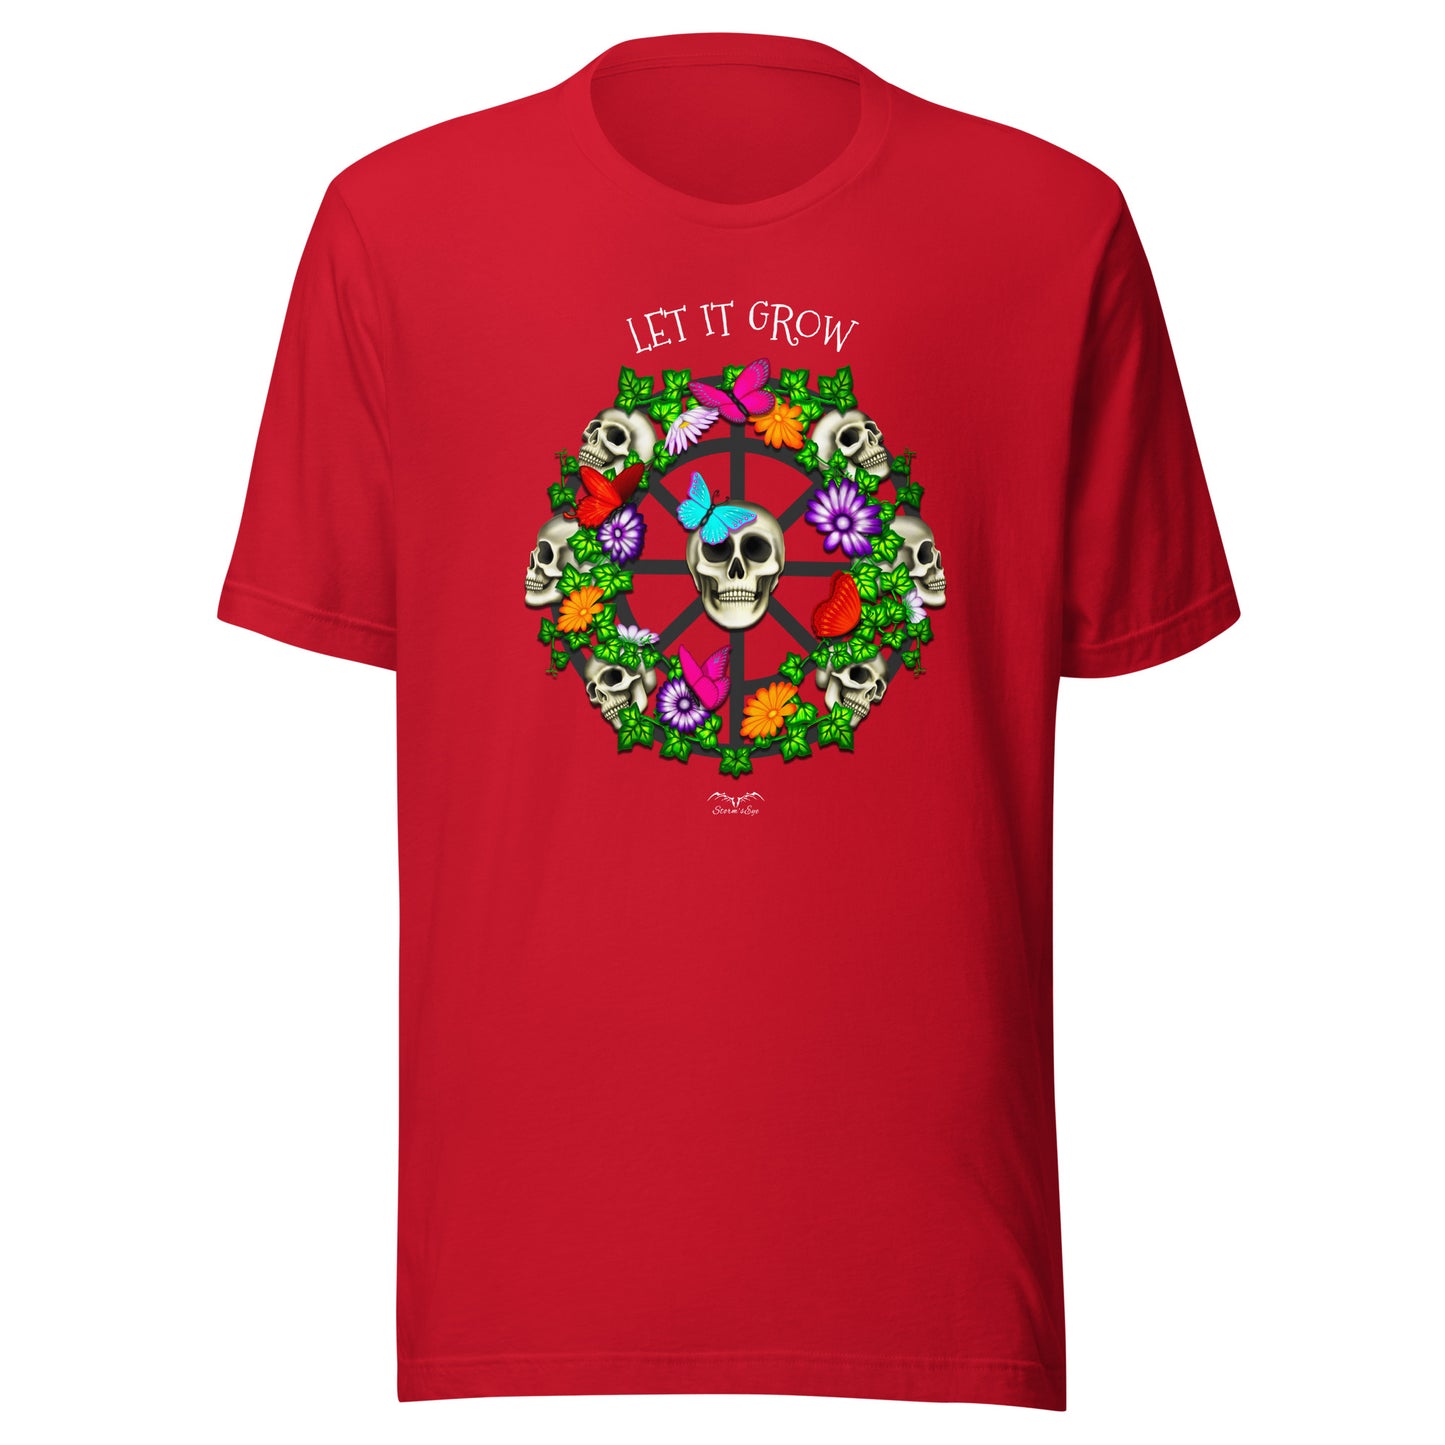 stormseye design skulls and flowers gothic T shirt, flat view red